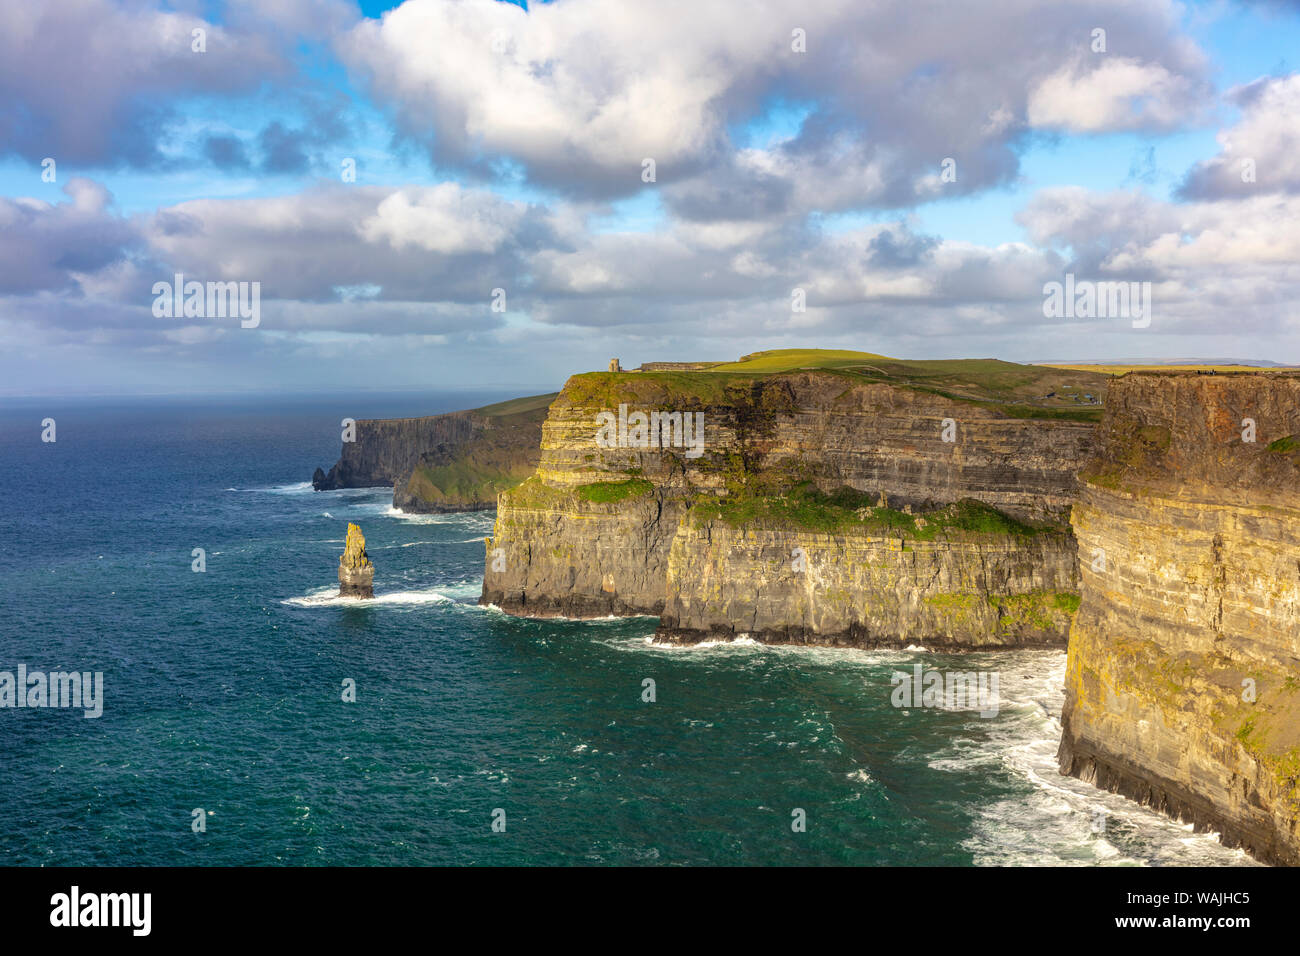 The Cliffs of Moher in County Clare Ireland Stock Photo